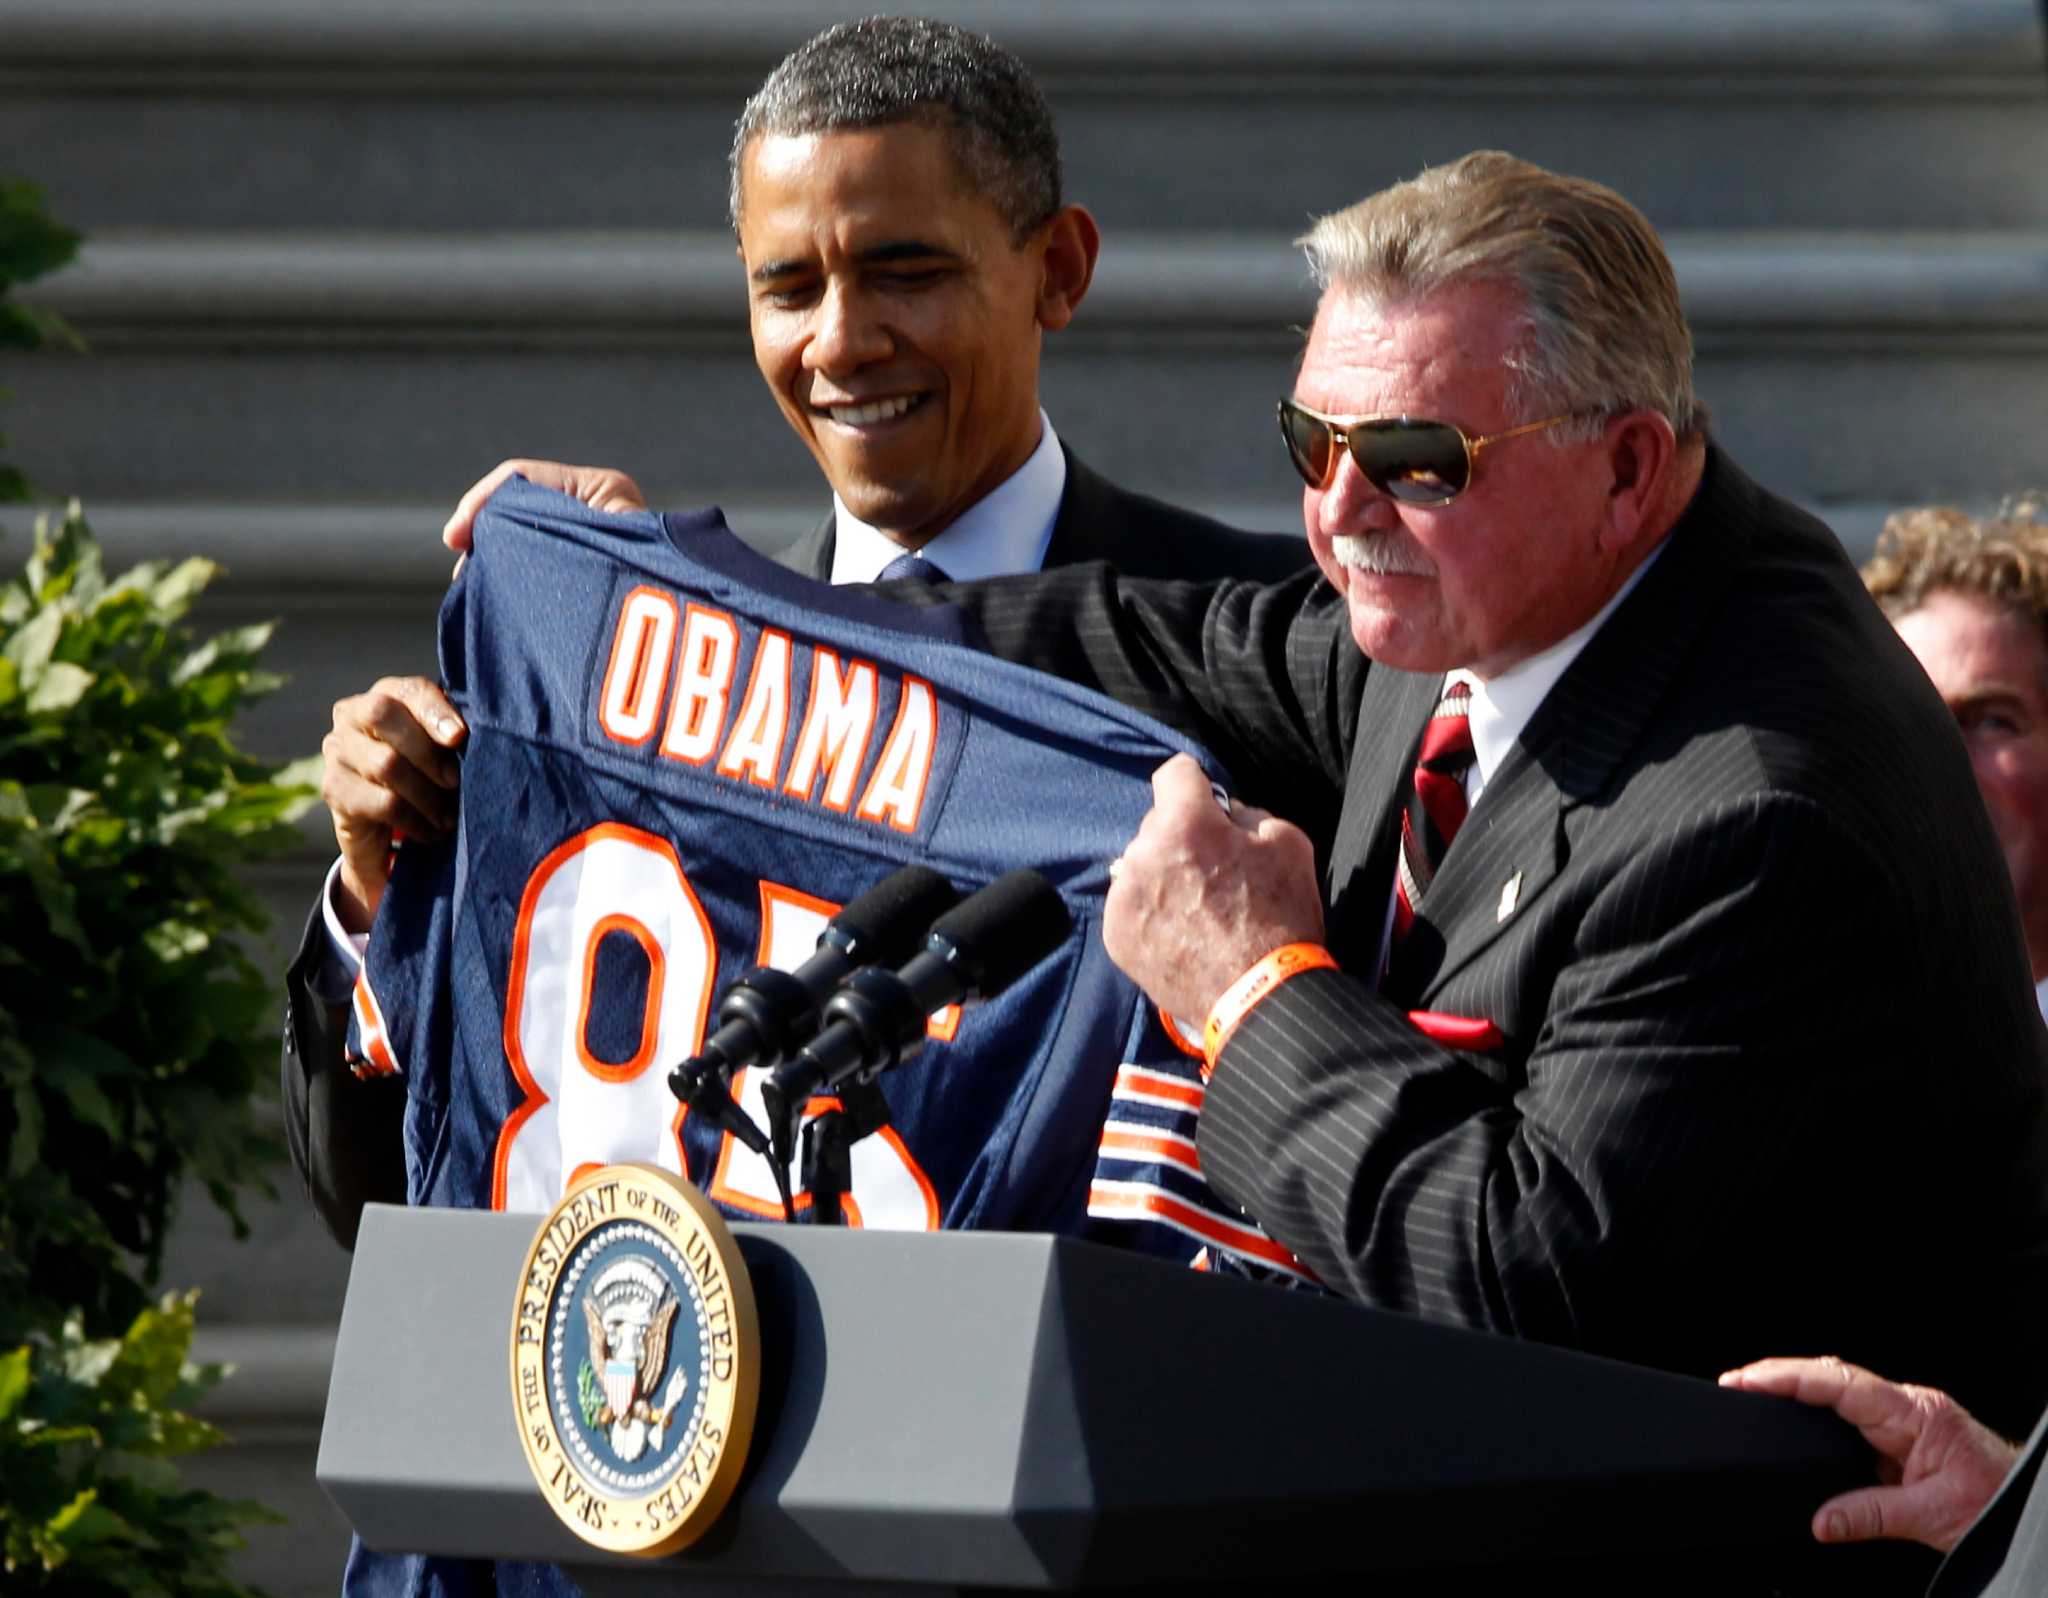 Sources: Ditka off ESPN show, but not because of his Obama remarks